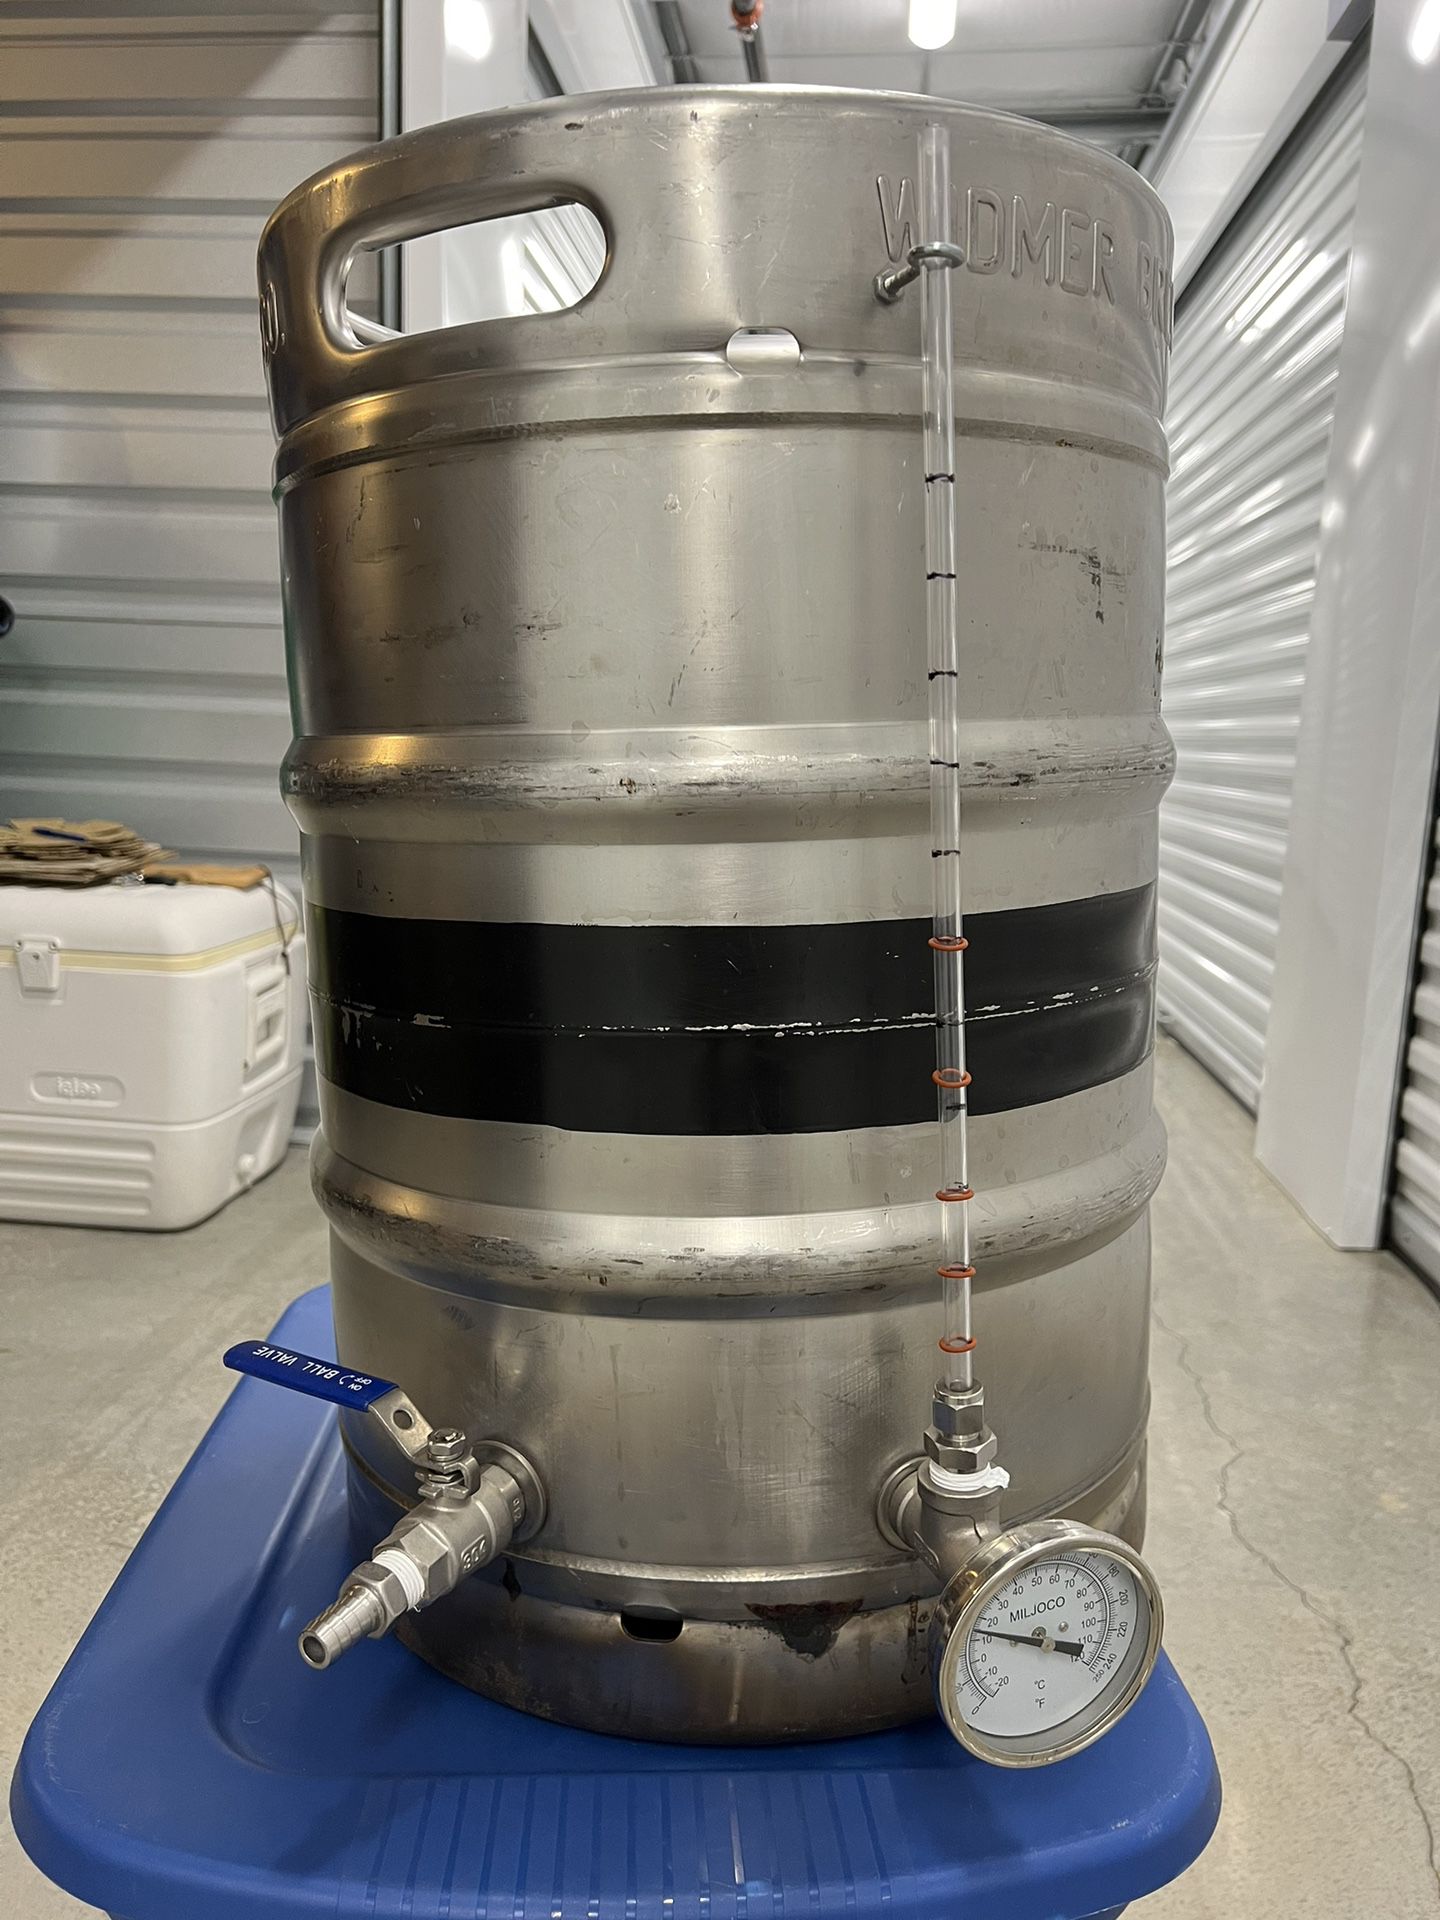 Brew Kettle and Supplies